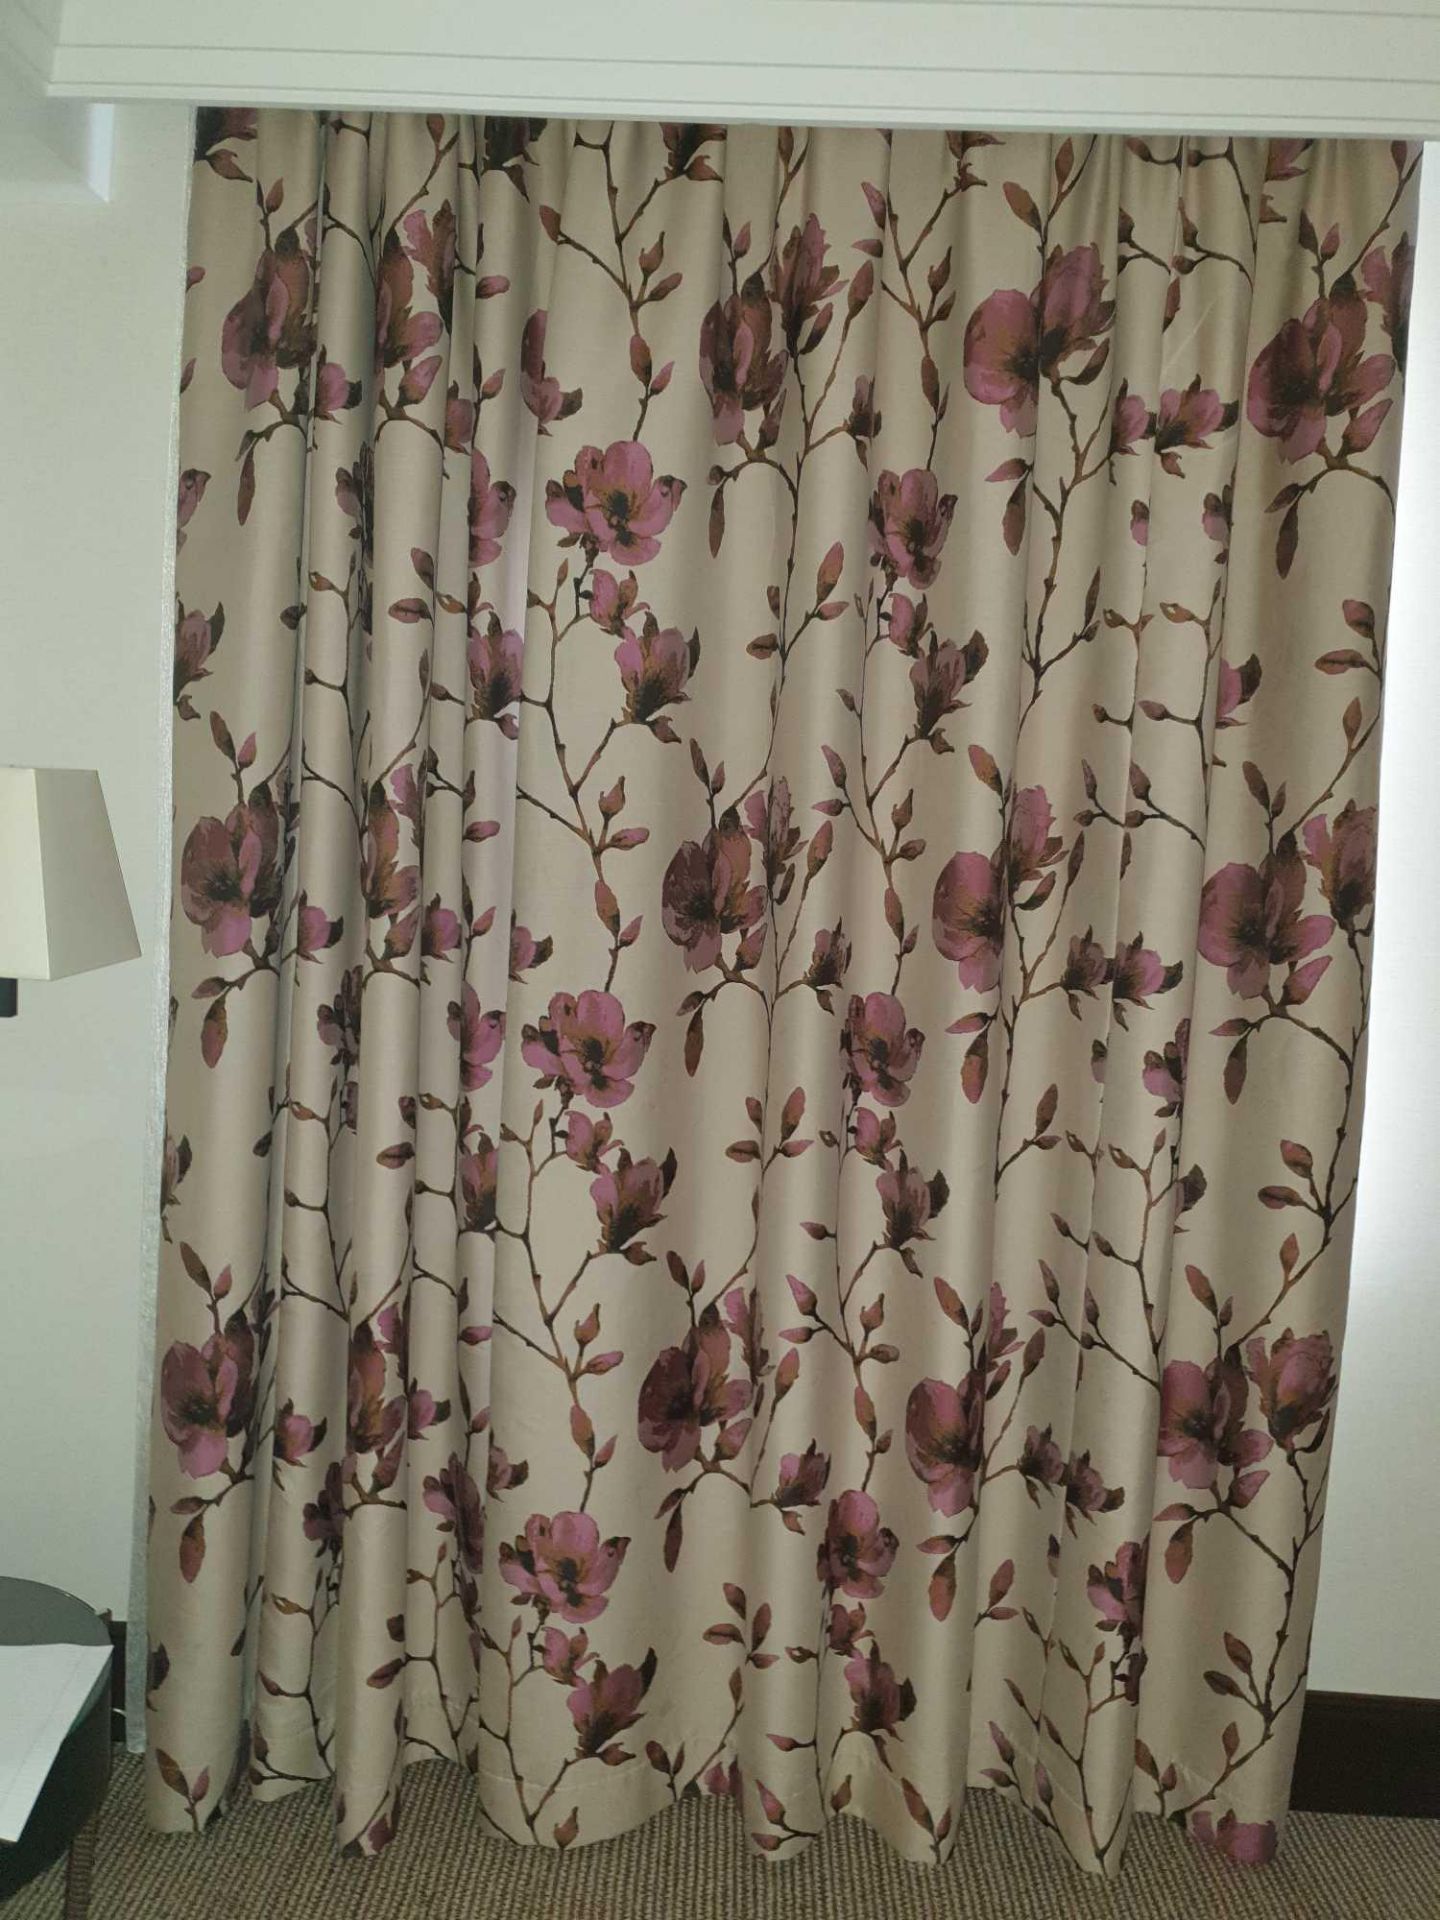 3 pairs of Drapes Jim Thompson Fabrics Soft Pink Floral Design Each Panel Measures 101 X 264 - Image 3 of 3